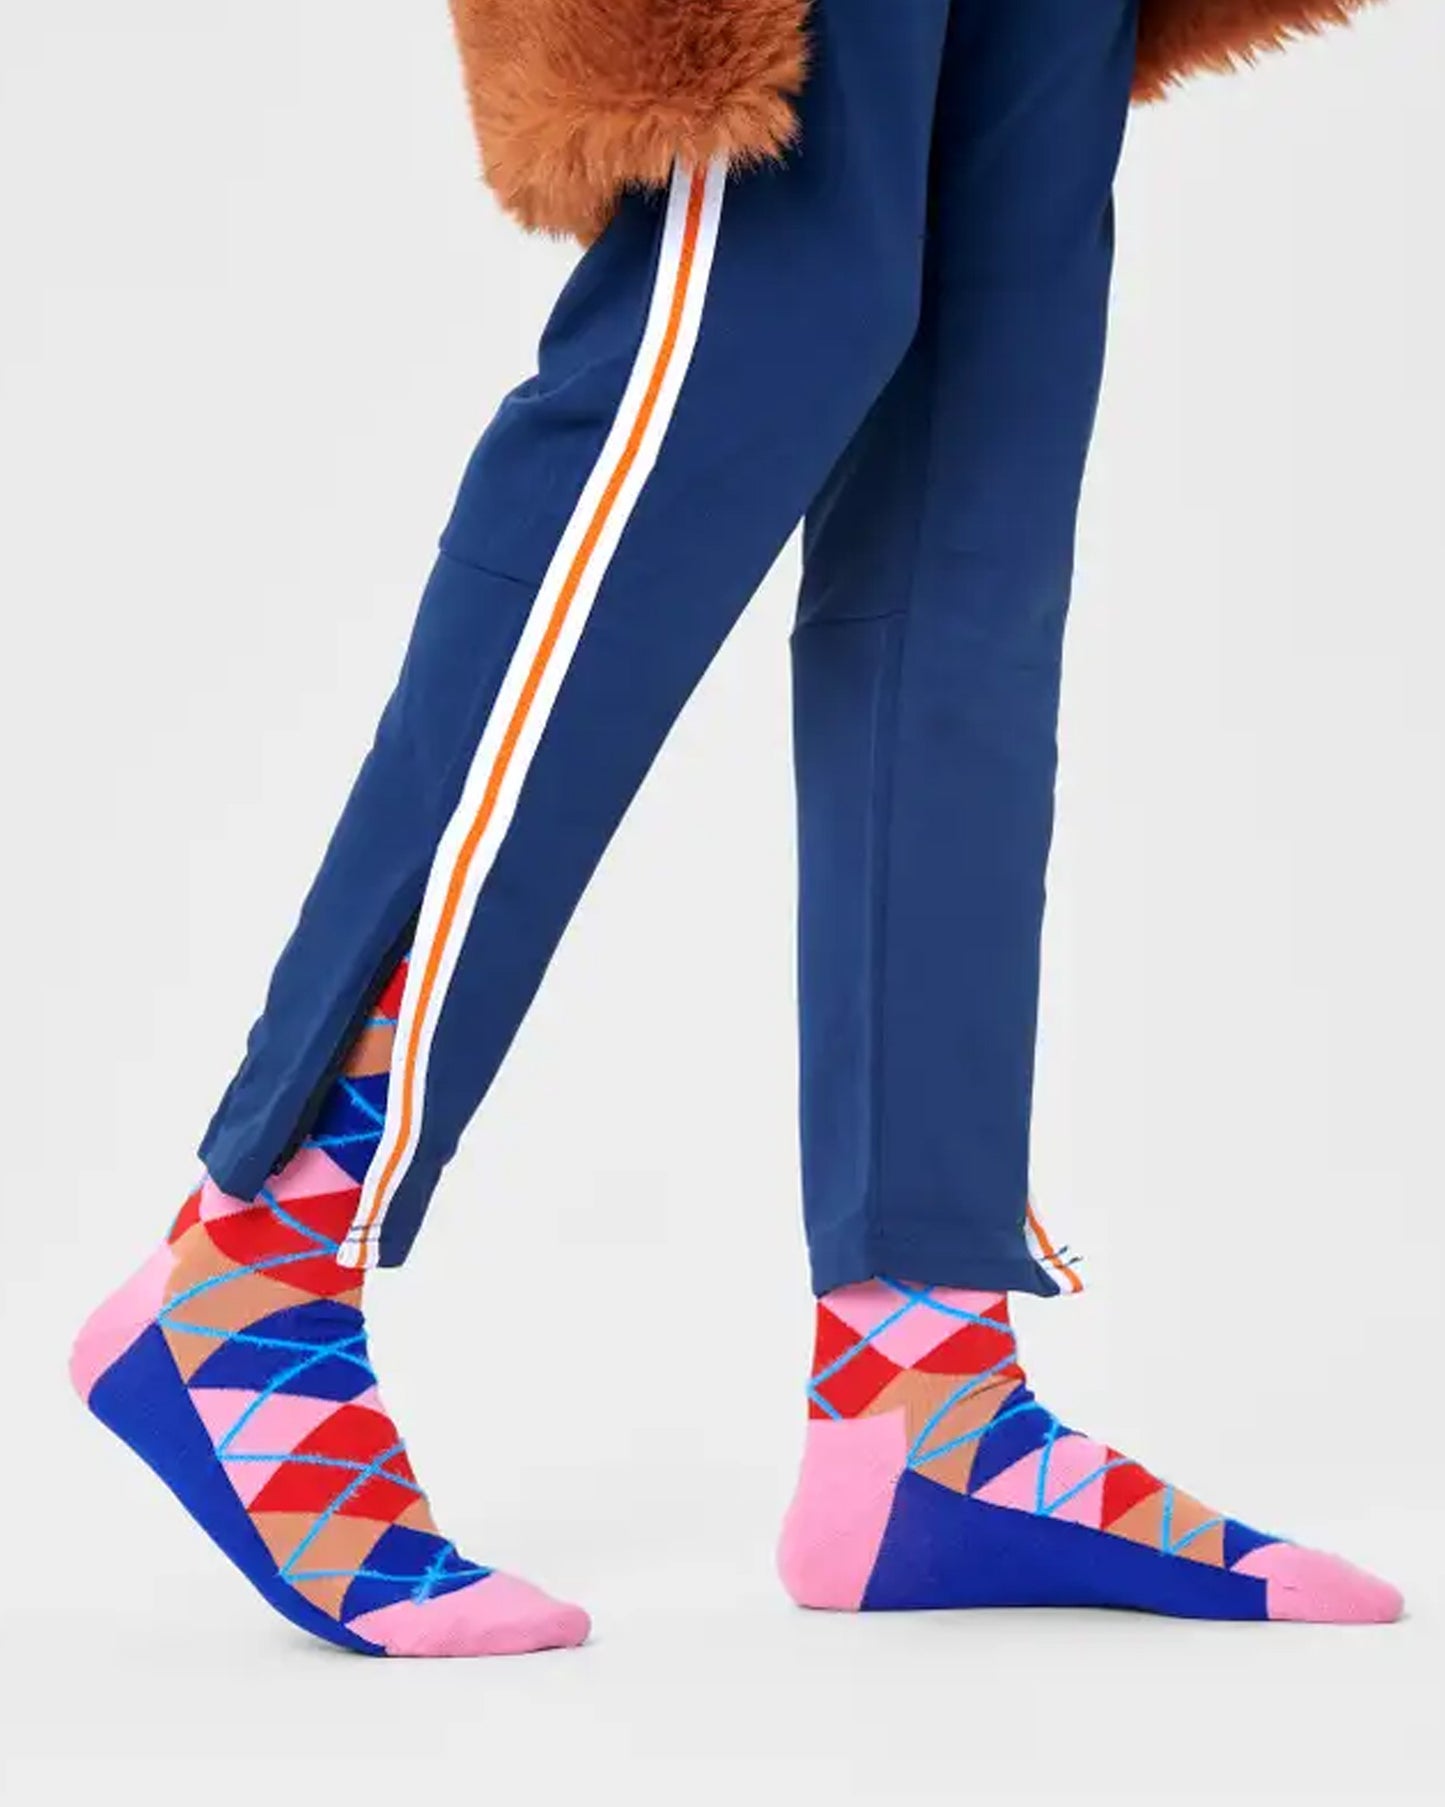 Happy Socks ARY01-8300 Argyle Sock - Cotton crew length ankle socks with a diamond argyle style pattern in royal blue, light pink, red and beige with a stripe of fluffy light blue, worn with sporty stripe pants and faux fur coat.